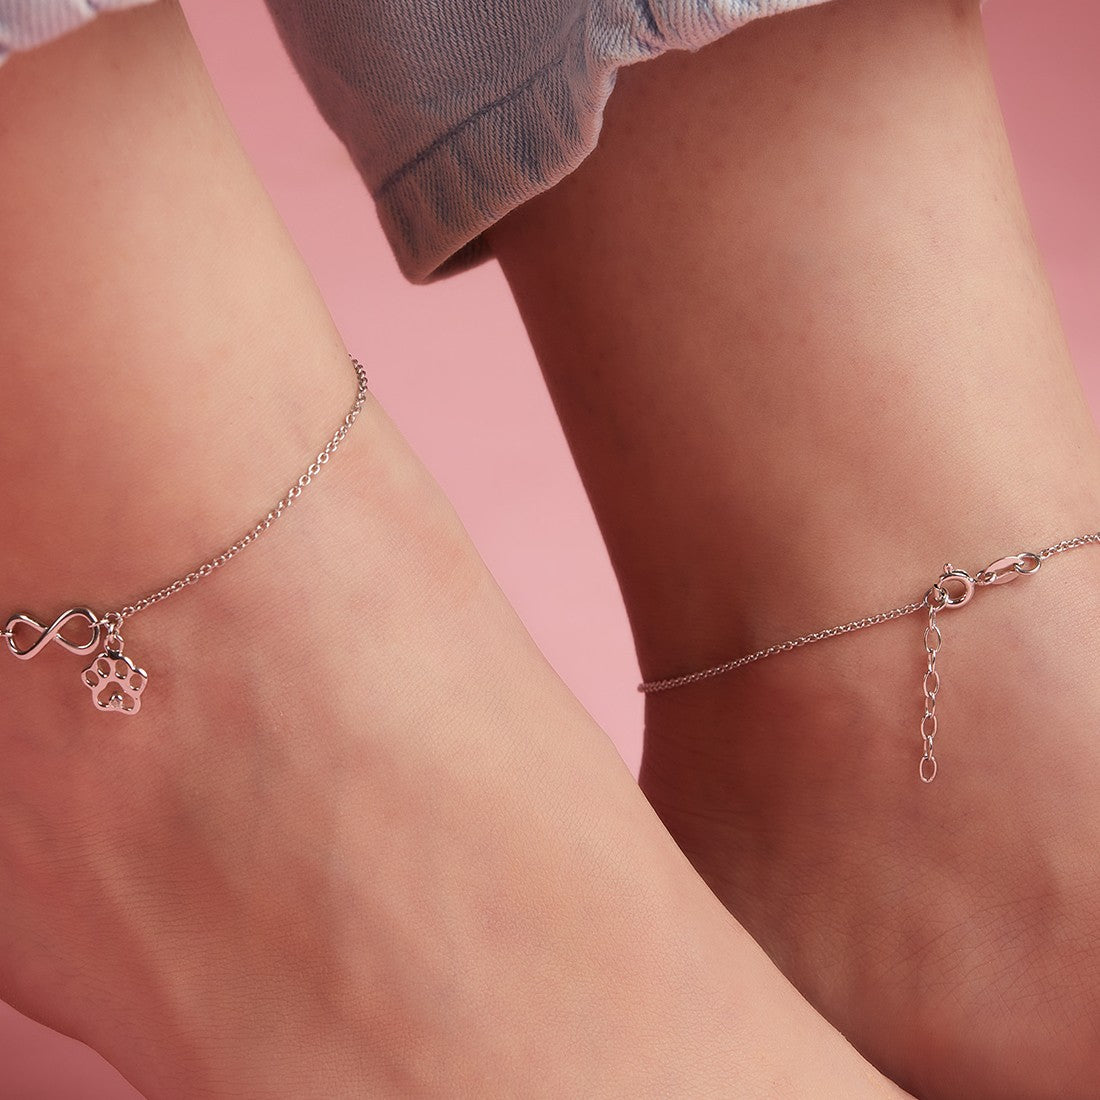 Infinity and Paw 925 Sterling Silver Anklets